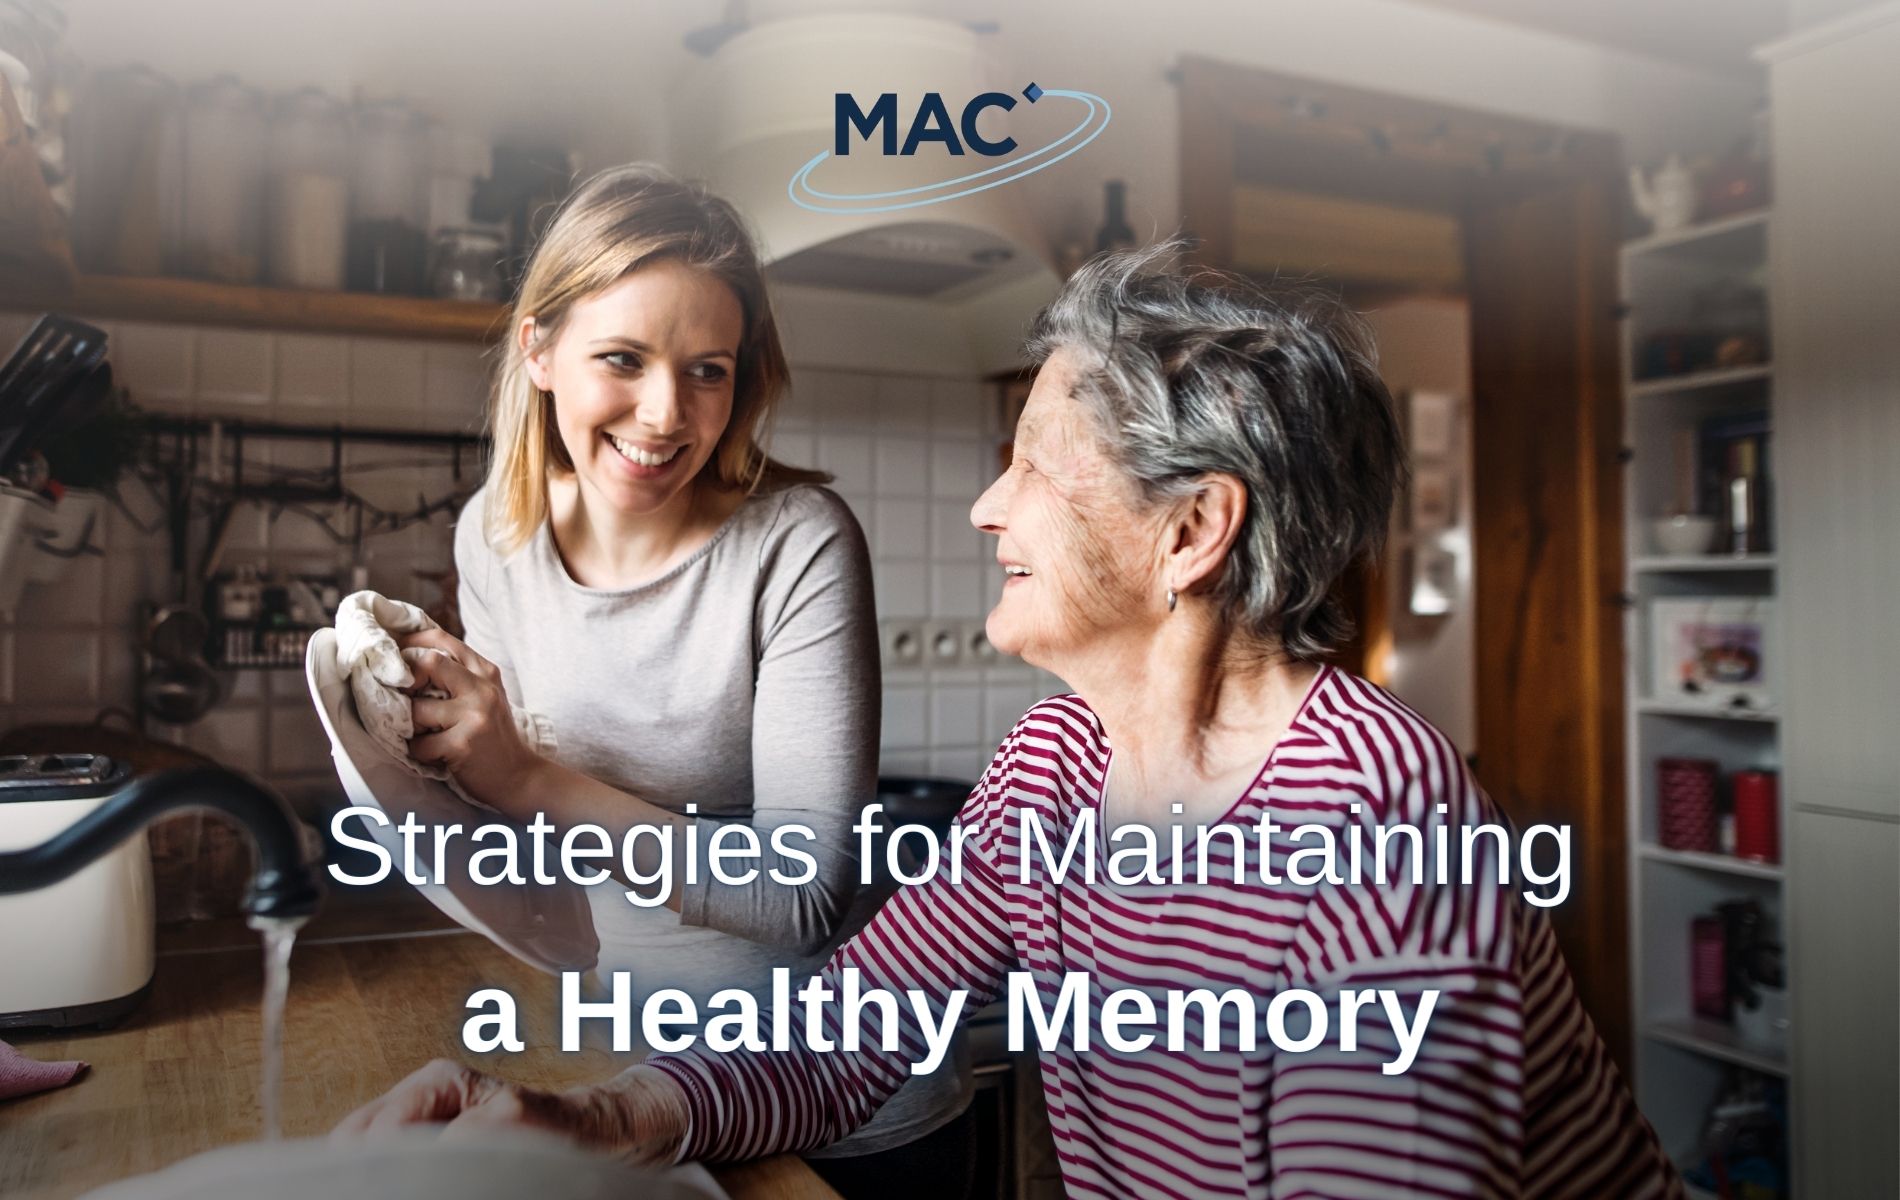 Strategies for Maintaining a Healthy Memory